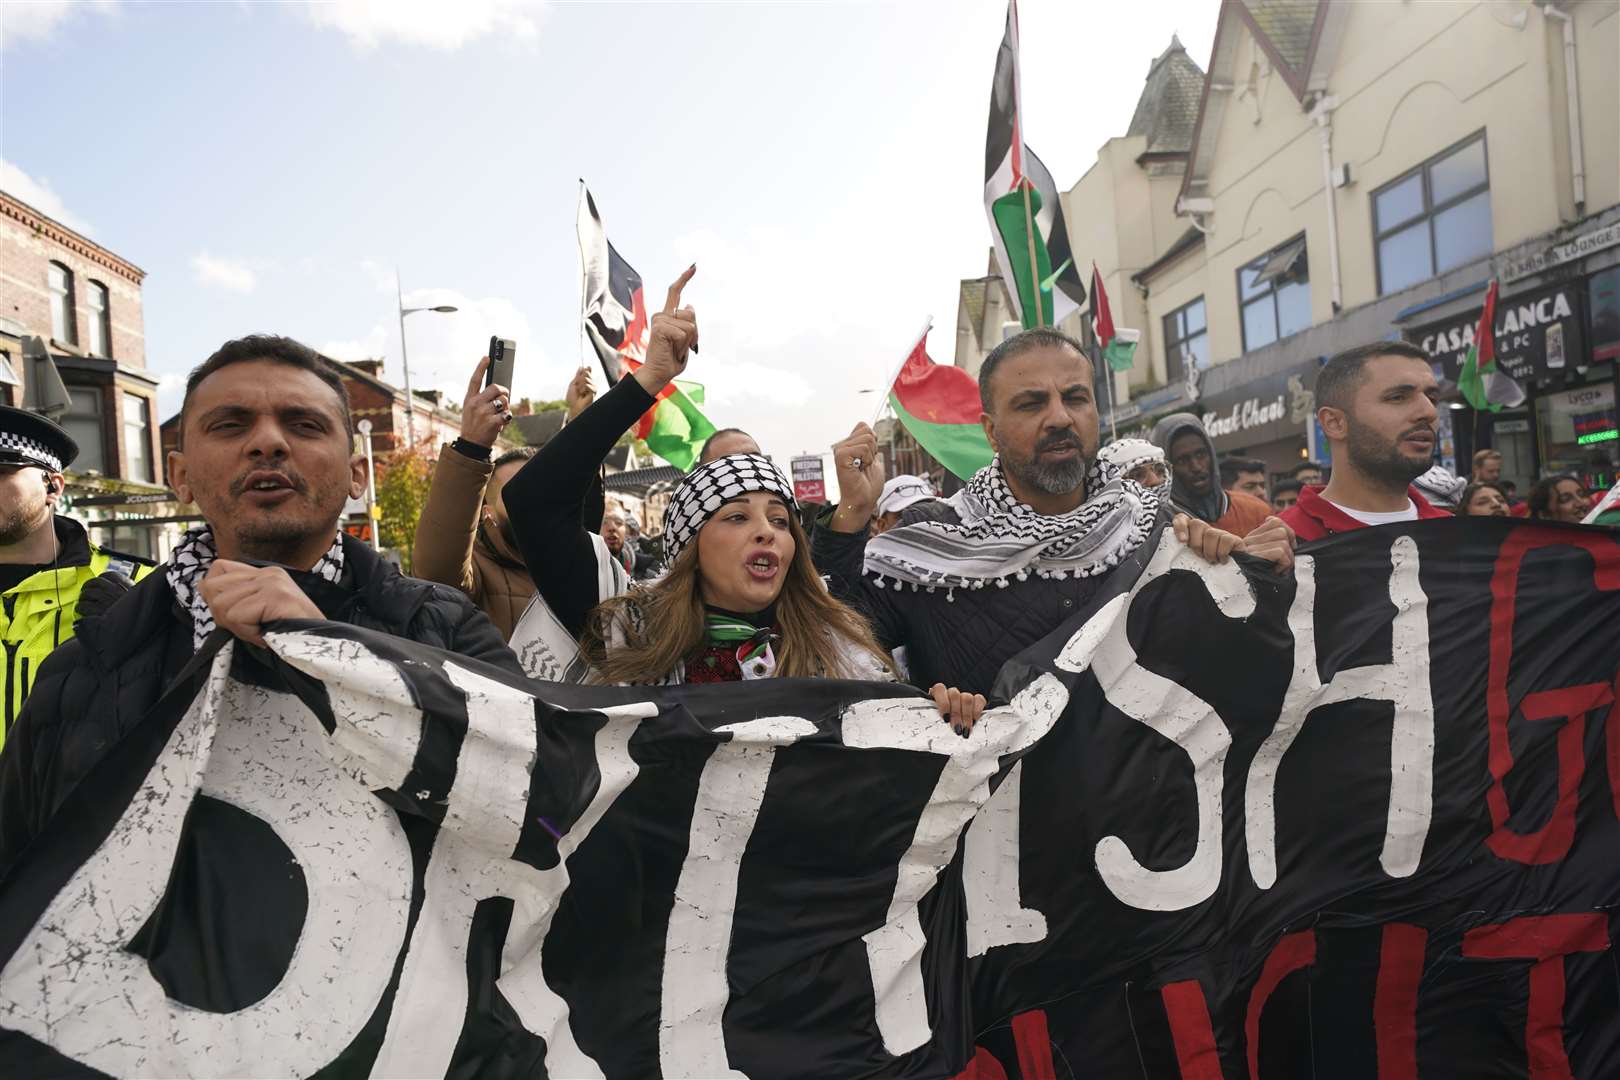 Protesters during a Manchester Palestine Action demonstration and march in Manchester (Danny Lawson/PA)